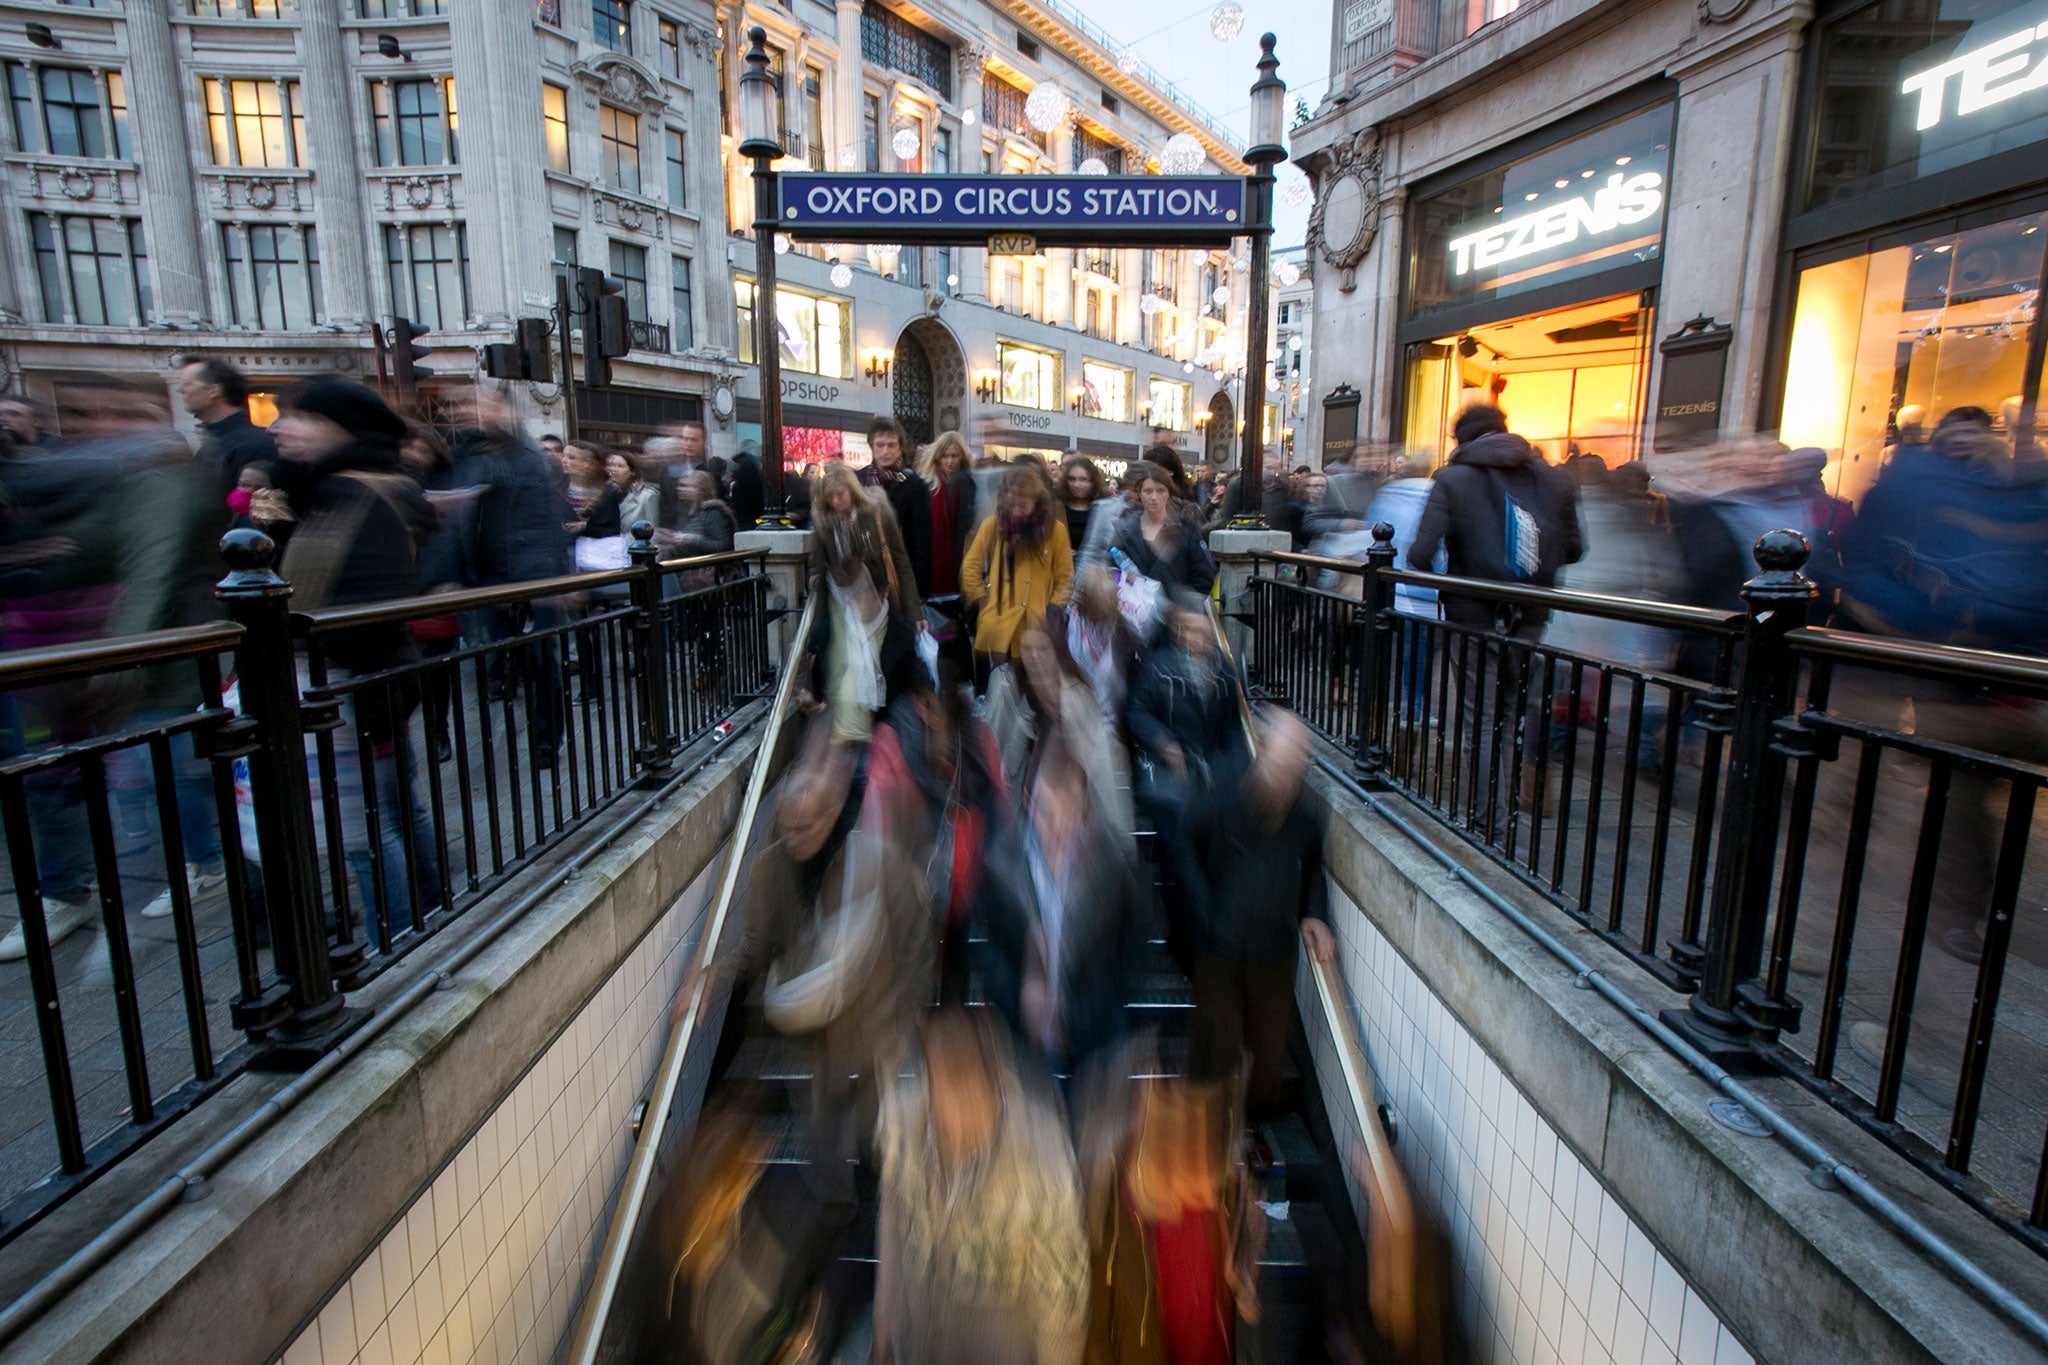 Shoppers in London's Oxford circus